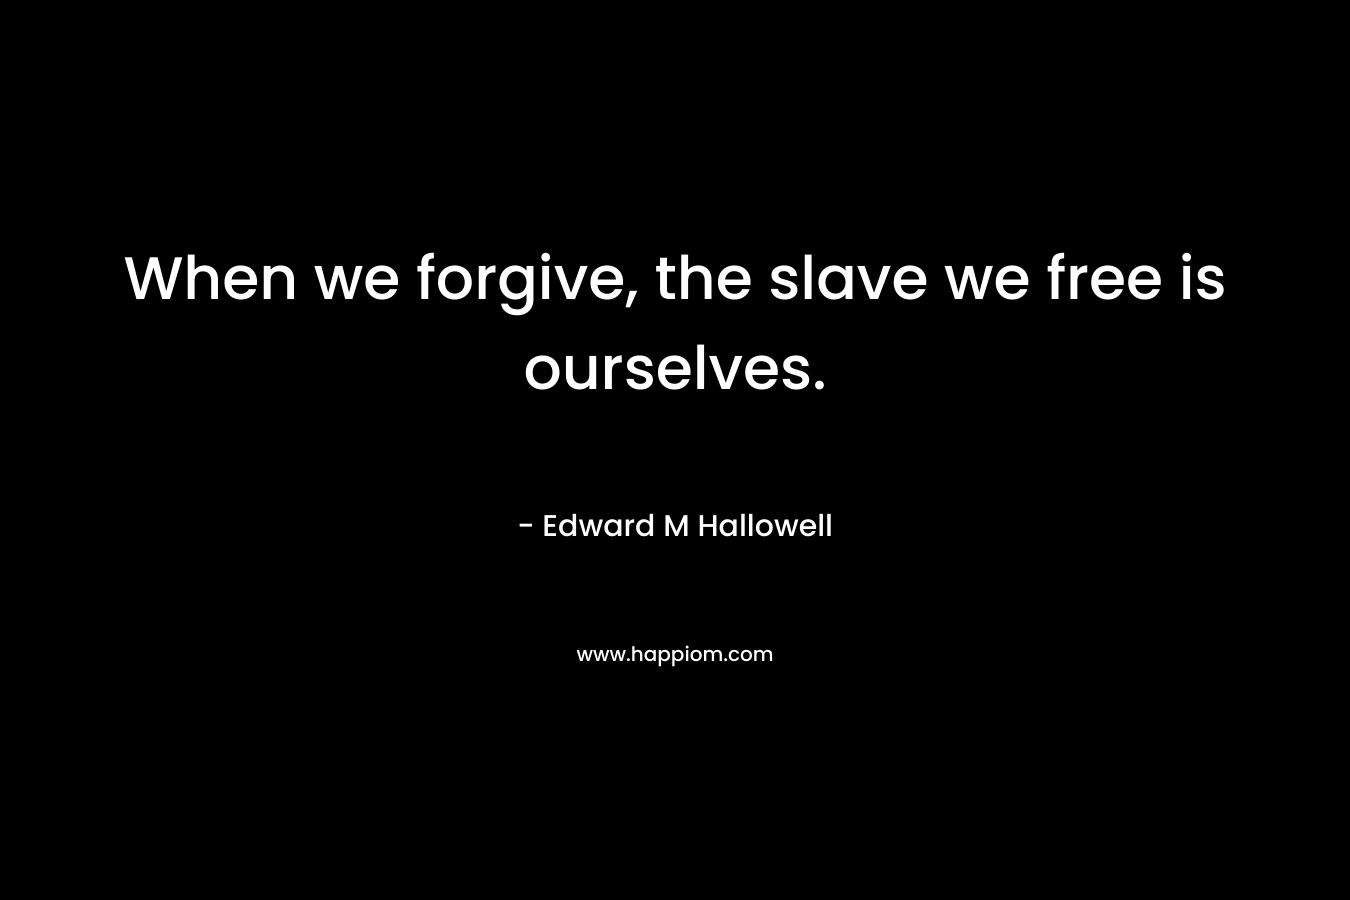 When we forgive, the slave we free is ourselves.